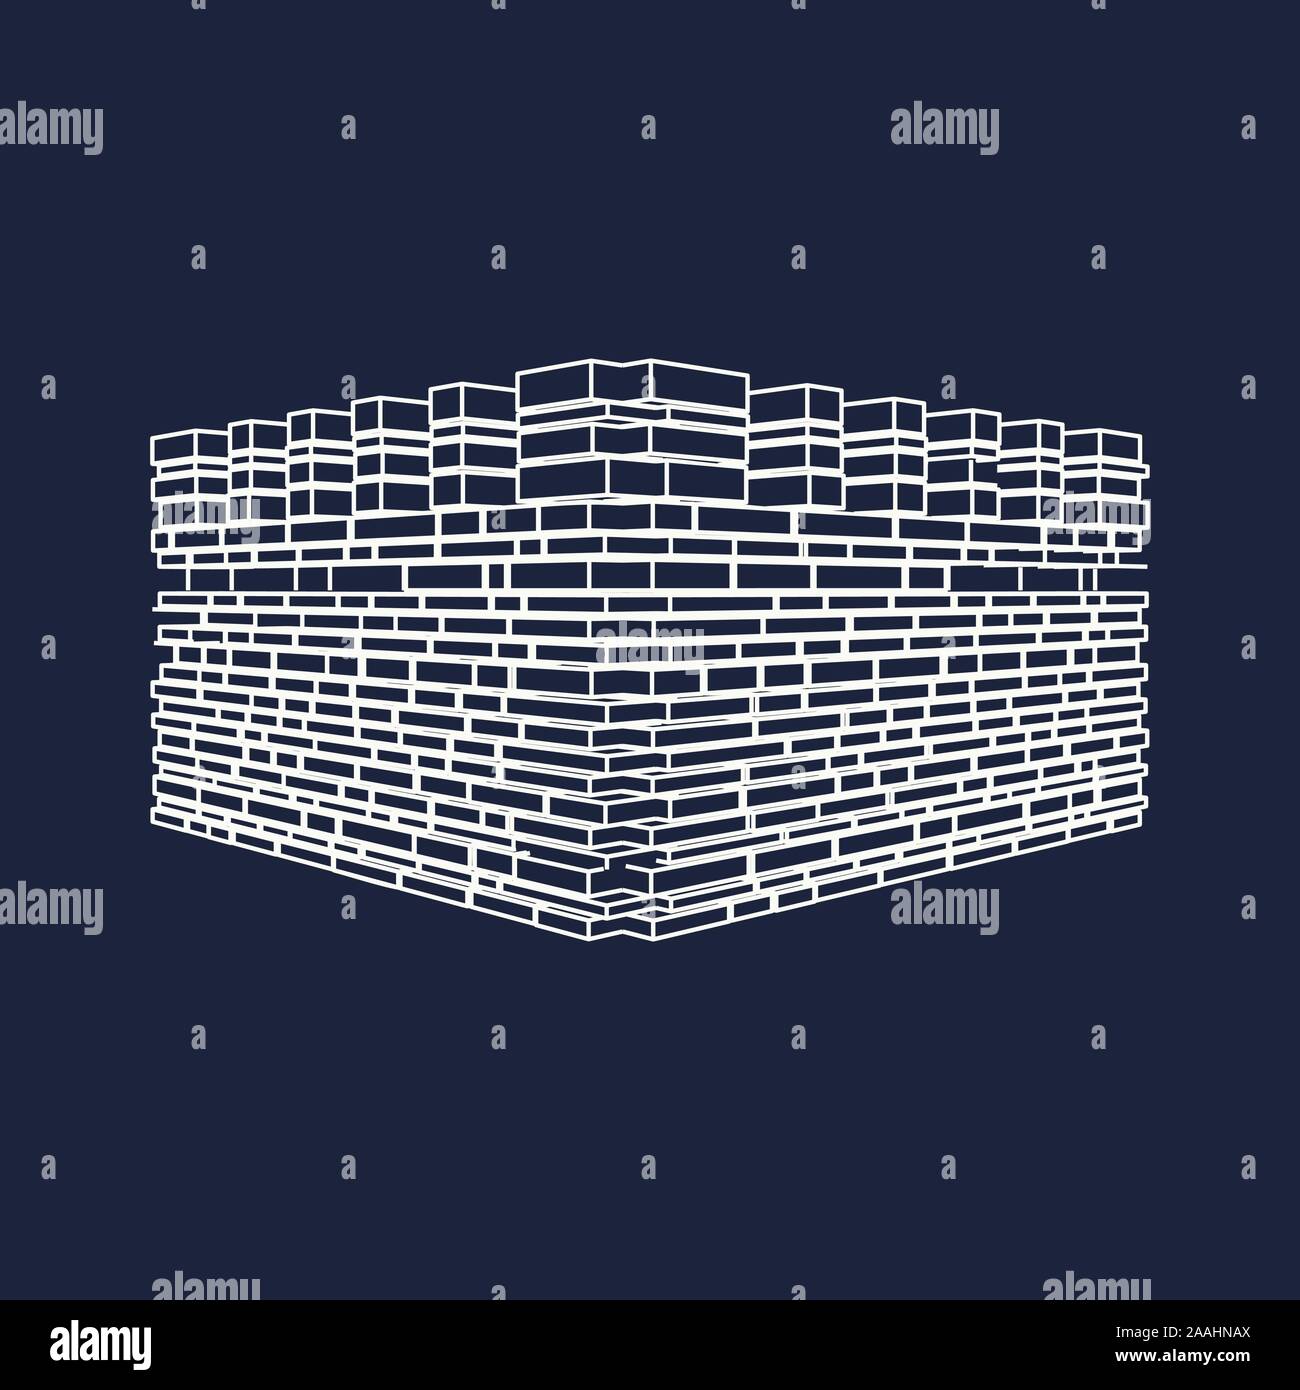 Part of the abstract castle defense wall. Stock Vector